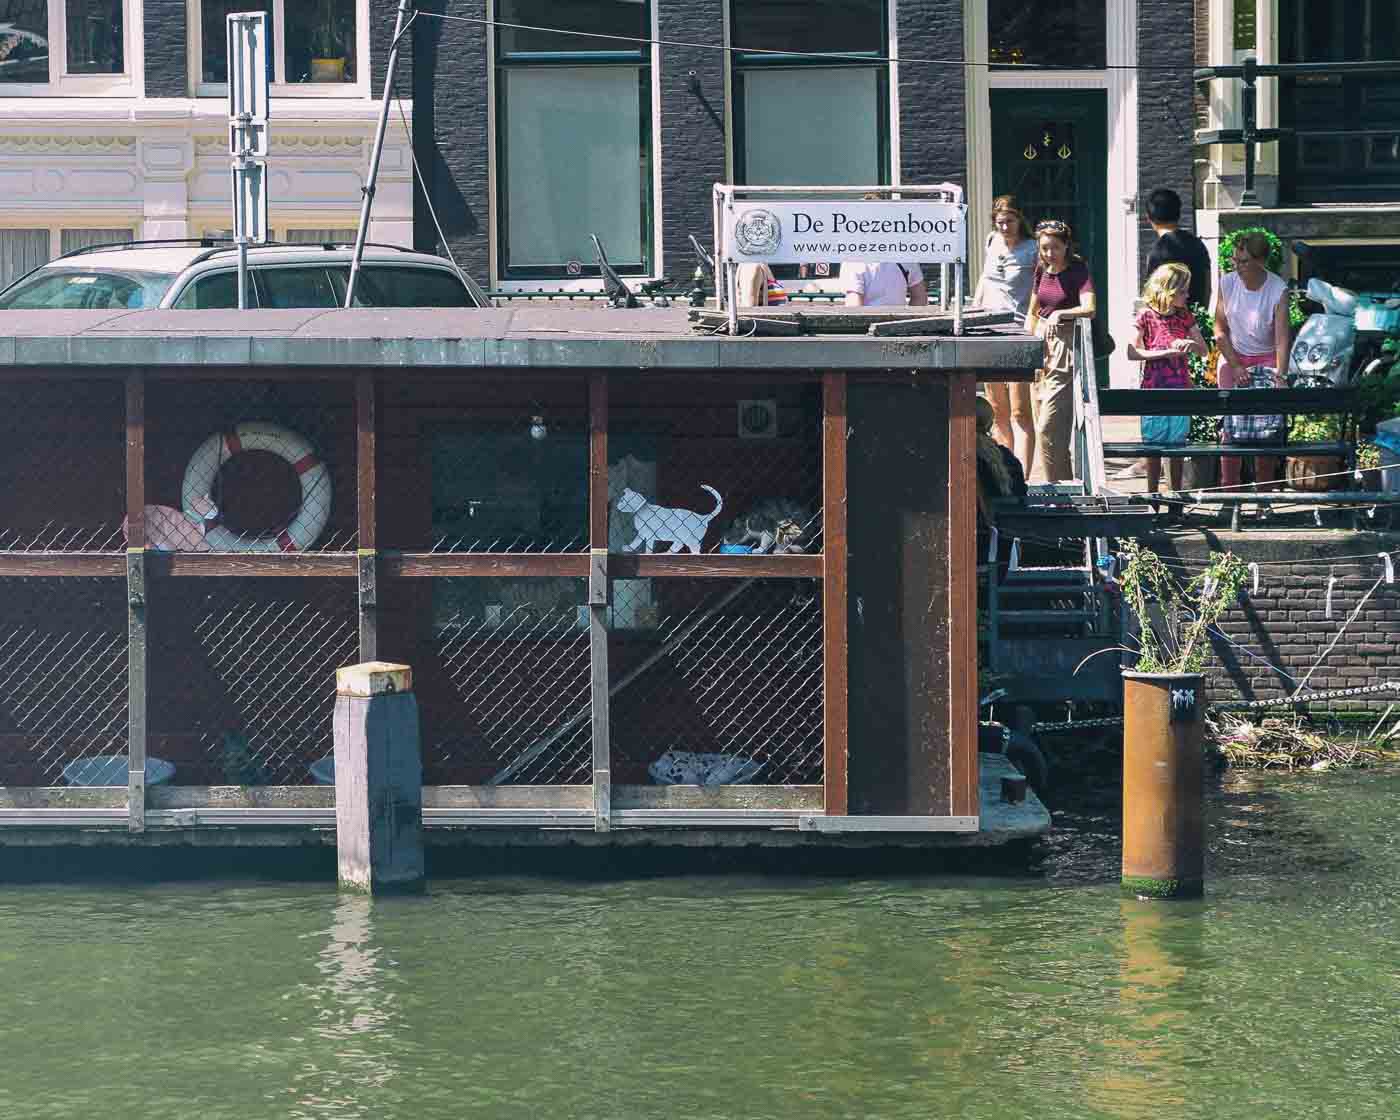 De Poezenboot, also known as "The Catboat," is a floating animal sanctuary on a canal in Amsterdam. Established by Henriette van Weelde in 1966, the Cat Boat provides shelter for stray, sick, and abandoned cats and has since grown into an official charity.